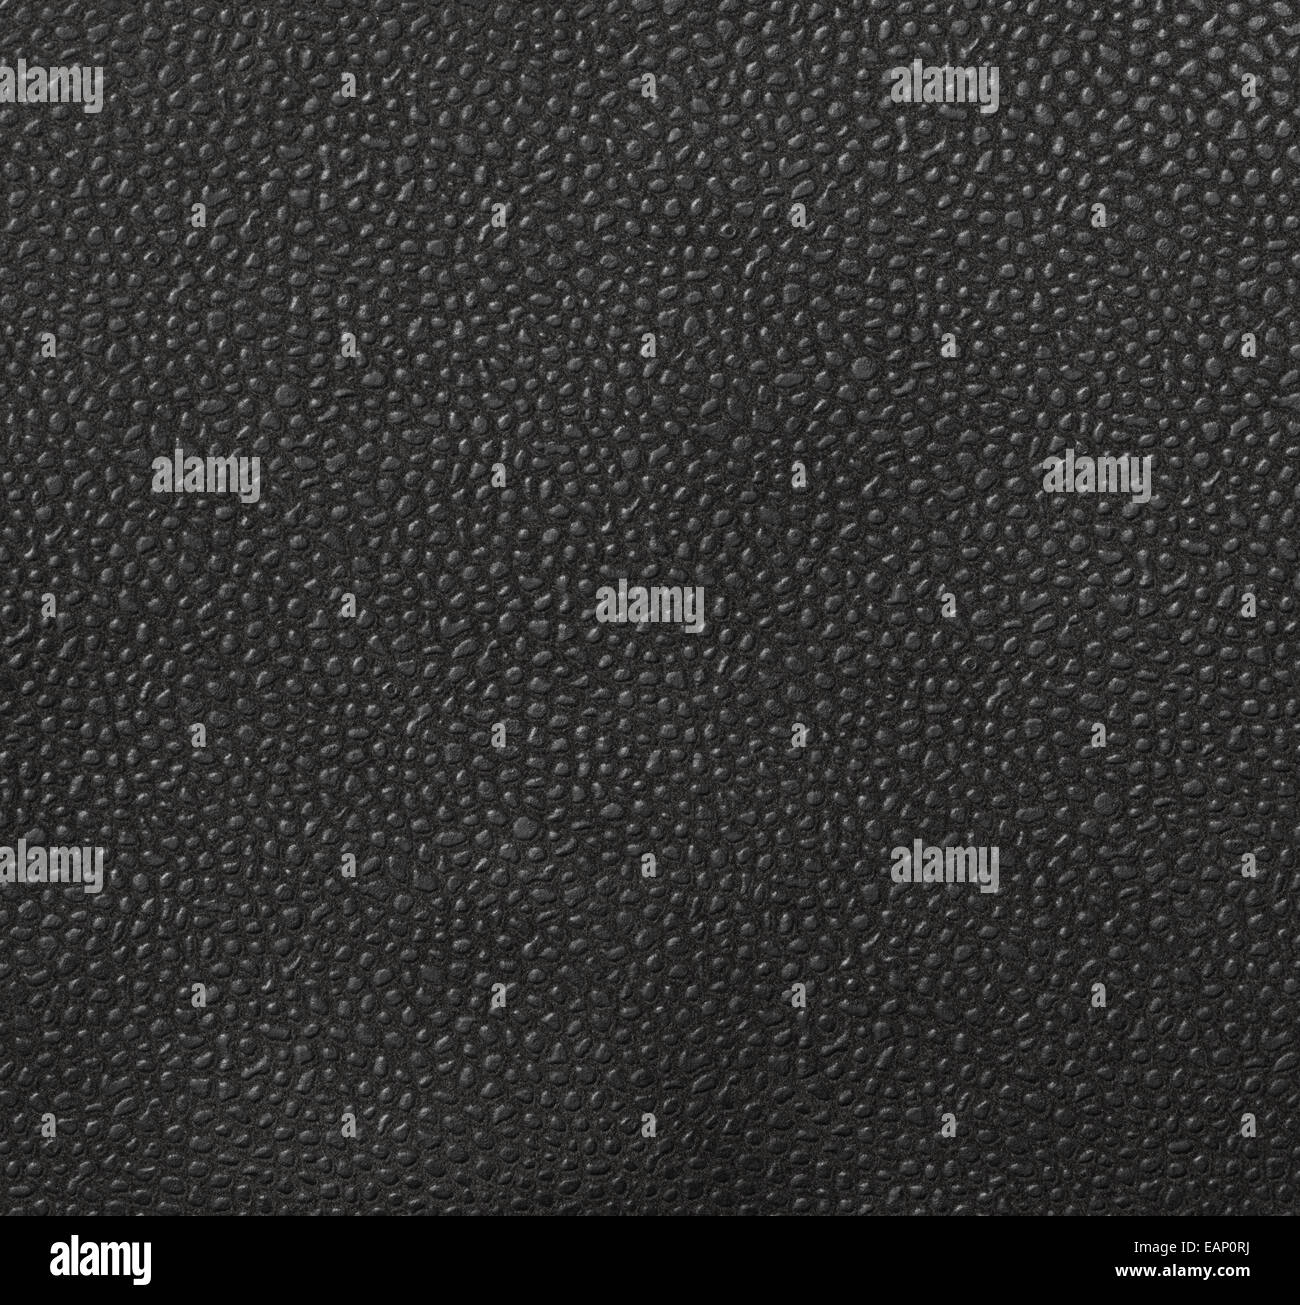 black leather texture or surface background Stock Photo